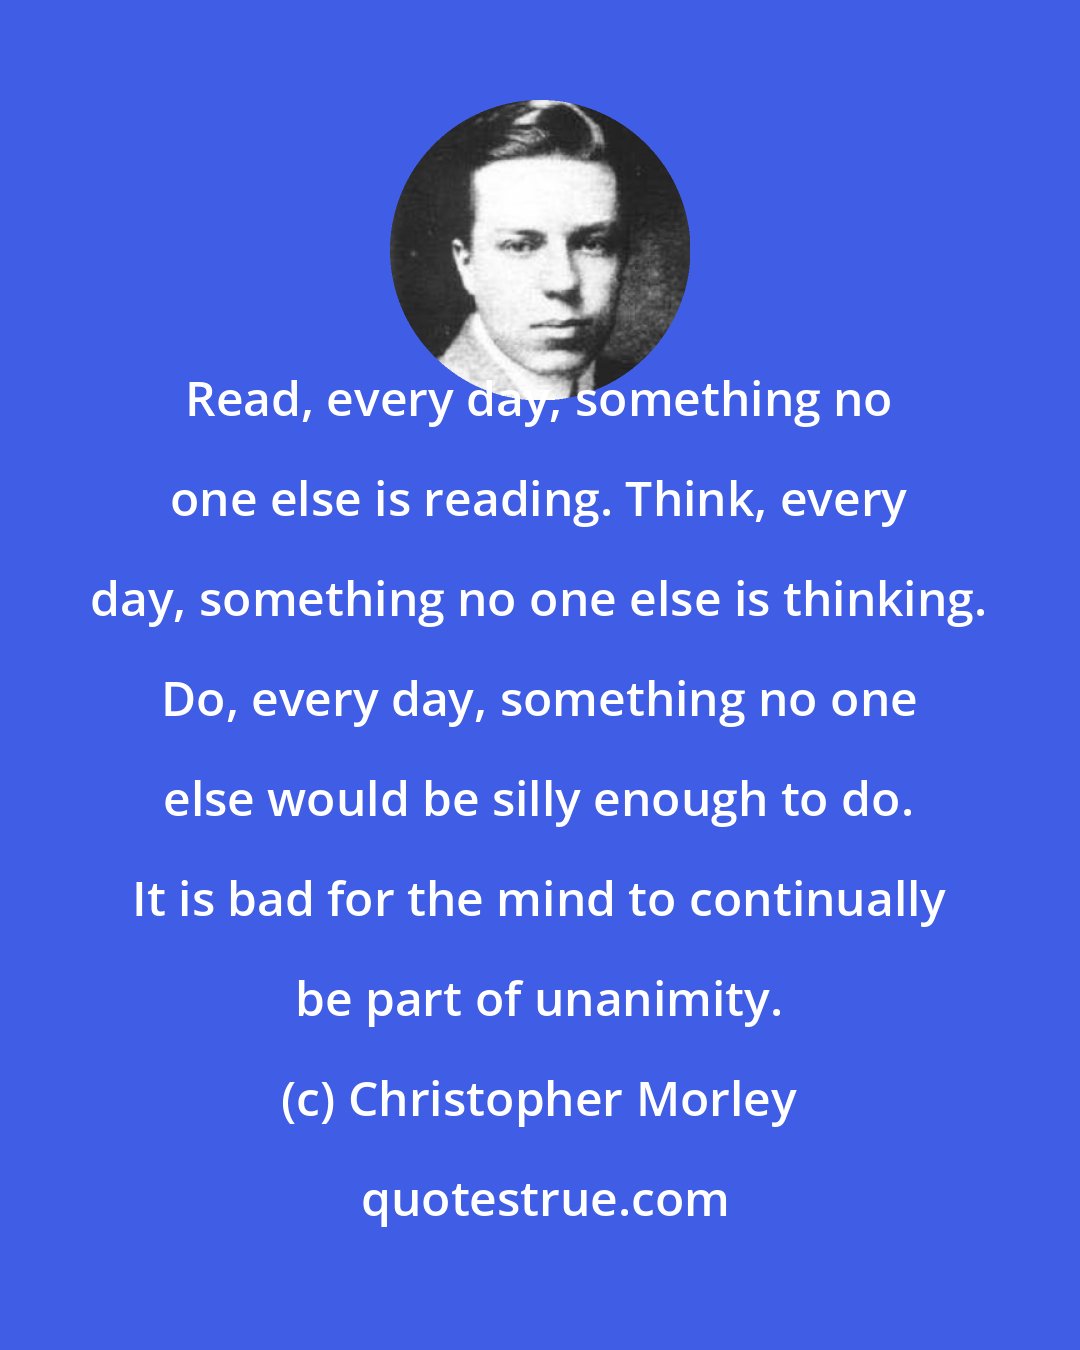 Christopher Morley: Read, every day, something no one else is reading. Think, every day, something no one else is thinking. Do, every day, something no one else would be silly enough to do. It is bad for the mind to continually be part of unanimity.